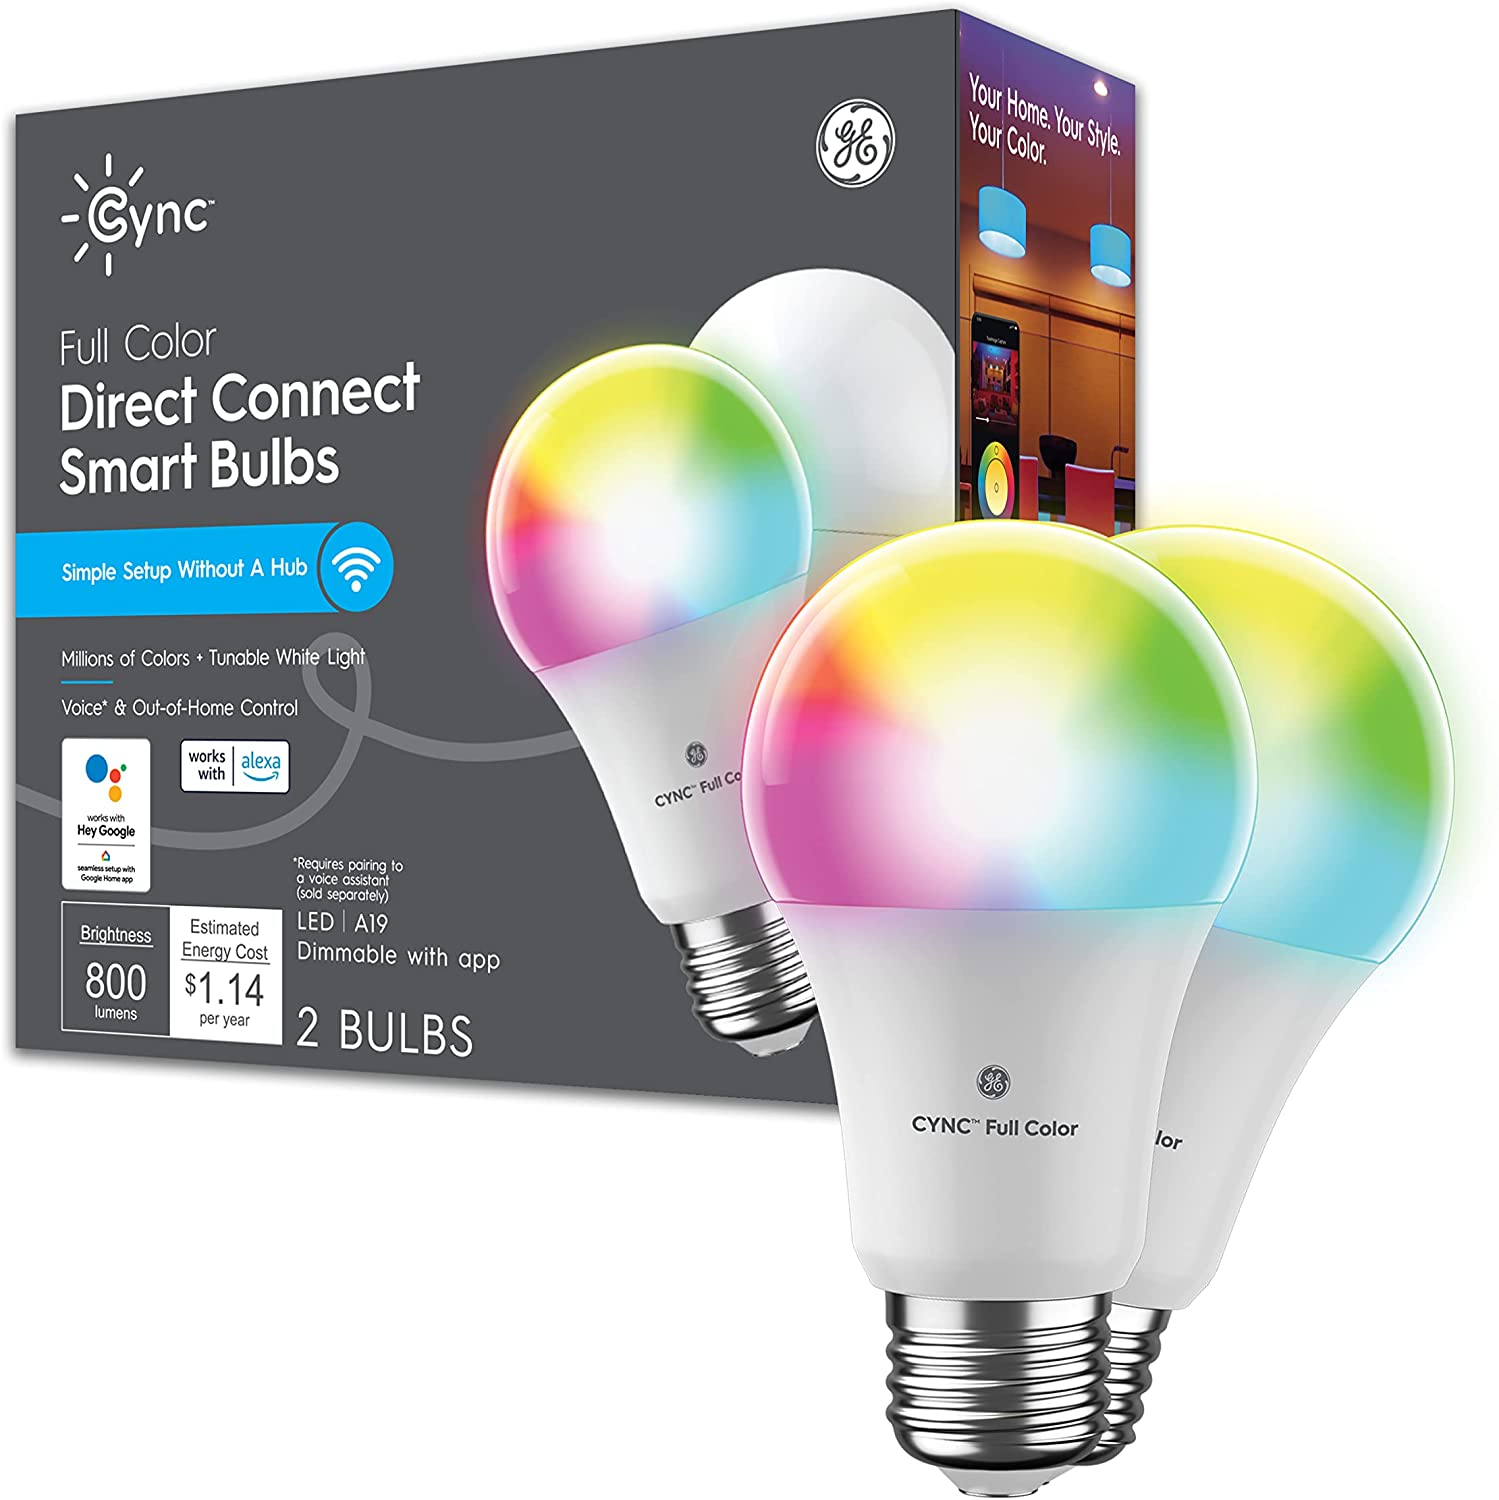 GE CYNC Smart LED Light Bulbs, Color Changing, Bluetooth and Wi-Fi Enabled, Alexa and Google Assistant Compatible, Dimmable, Standard Bulb Shape (2 Pack), Packaging May Vary